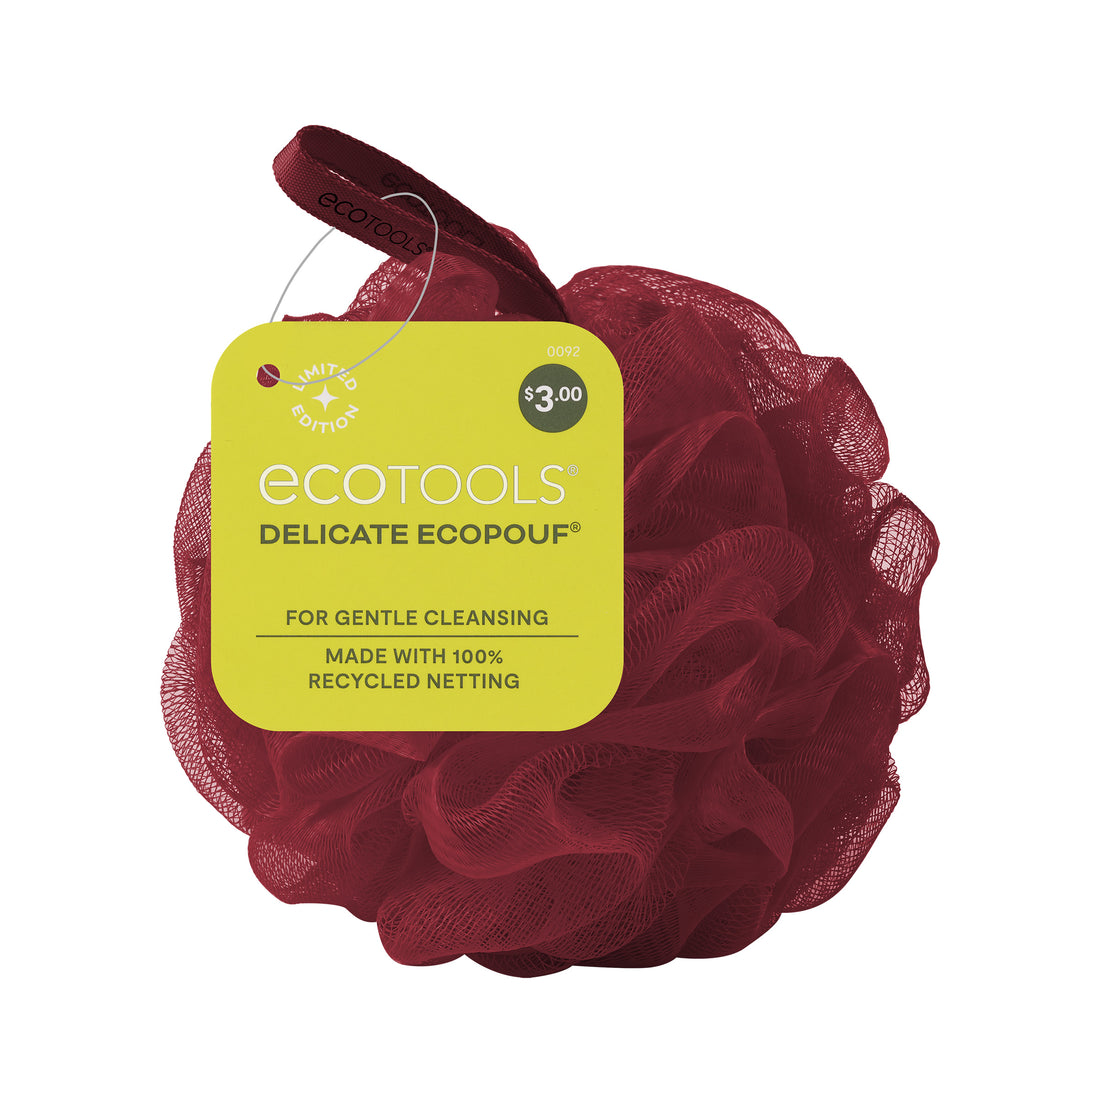 Limited Edition Red Delicate EcoPouf